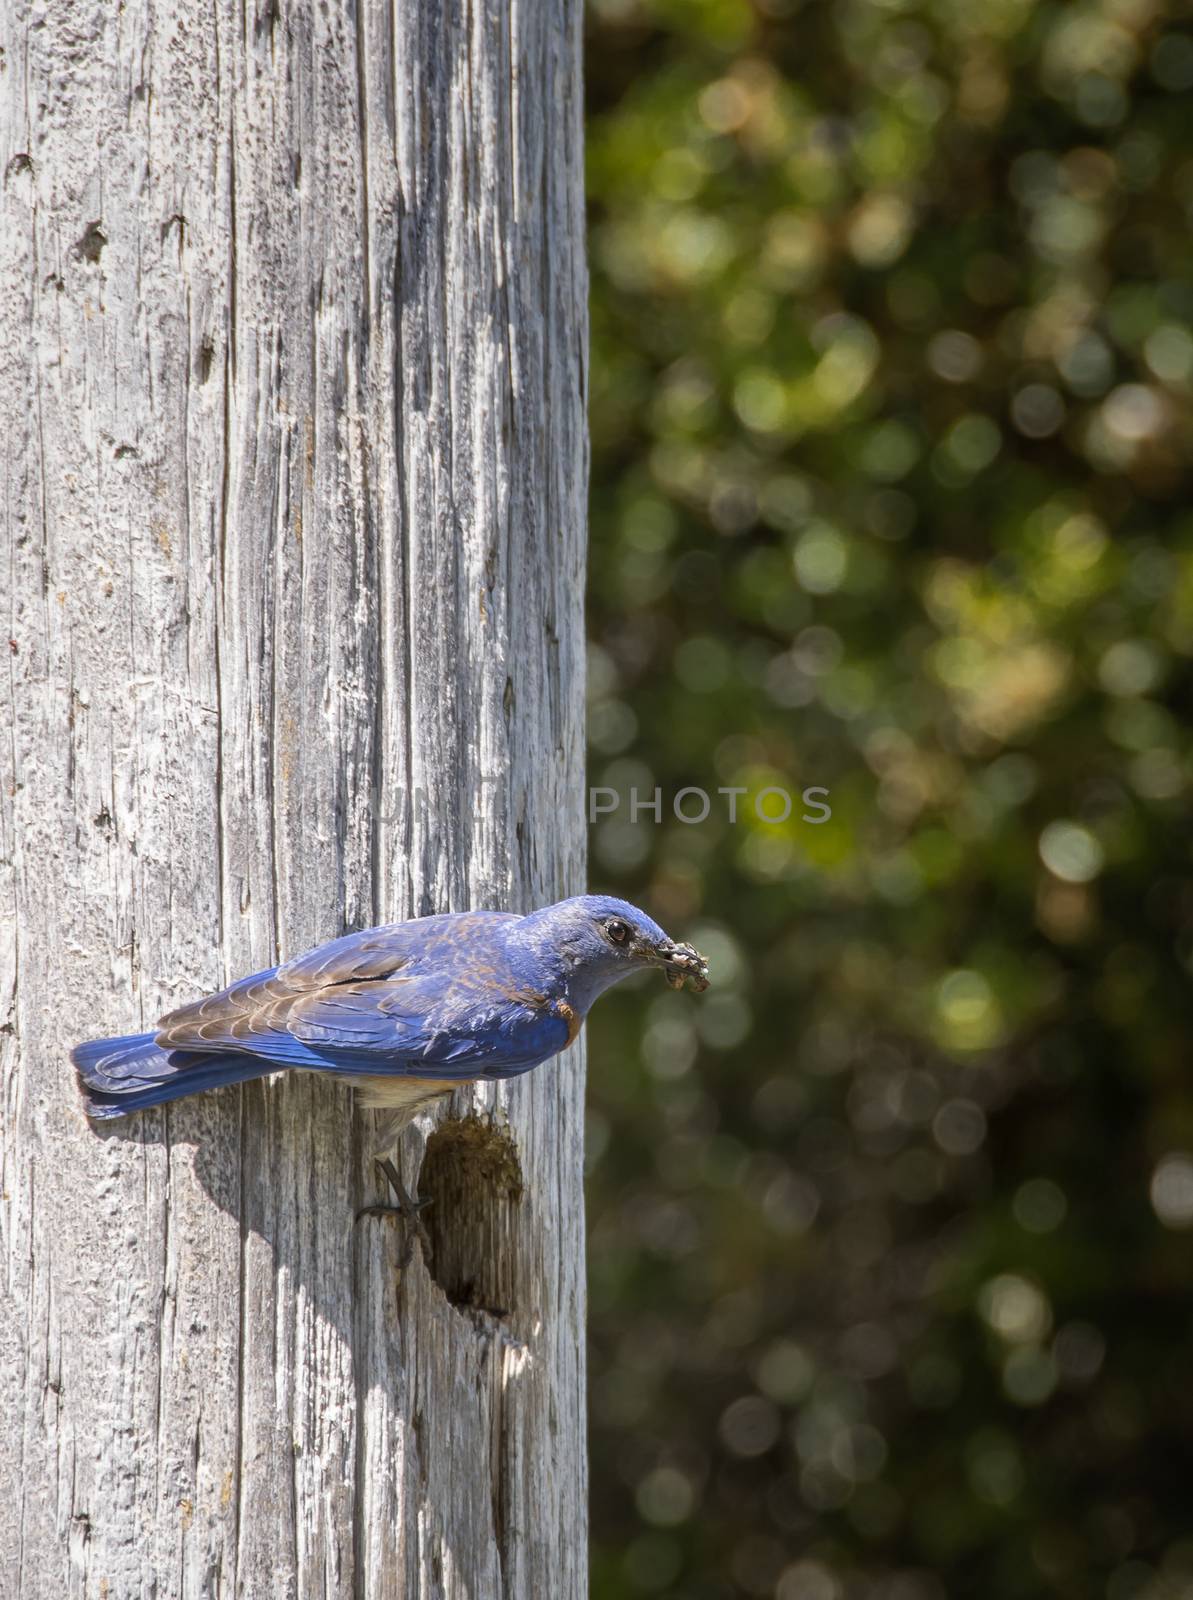 Male Western Bluebird carrying worms in his beak to feed his babies in the nest.